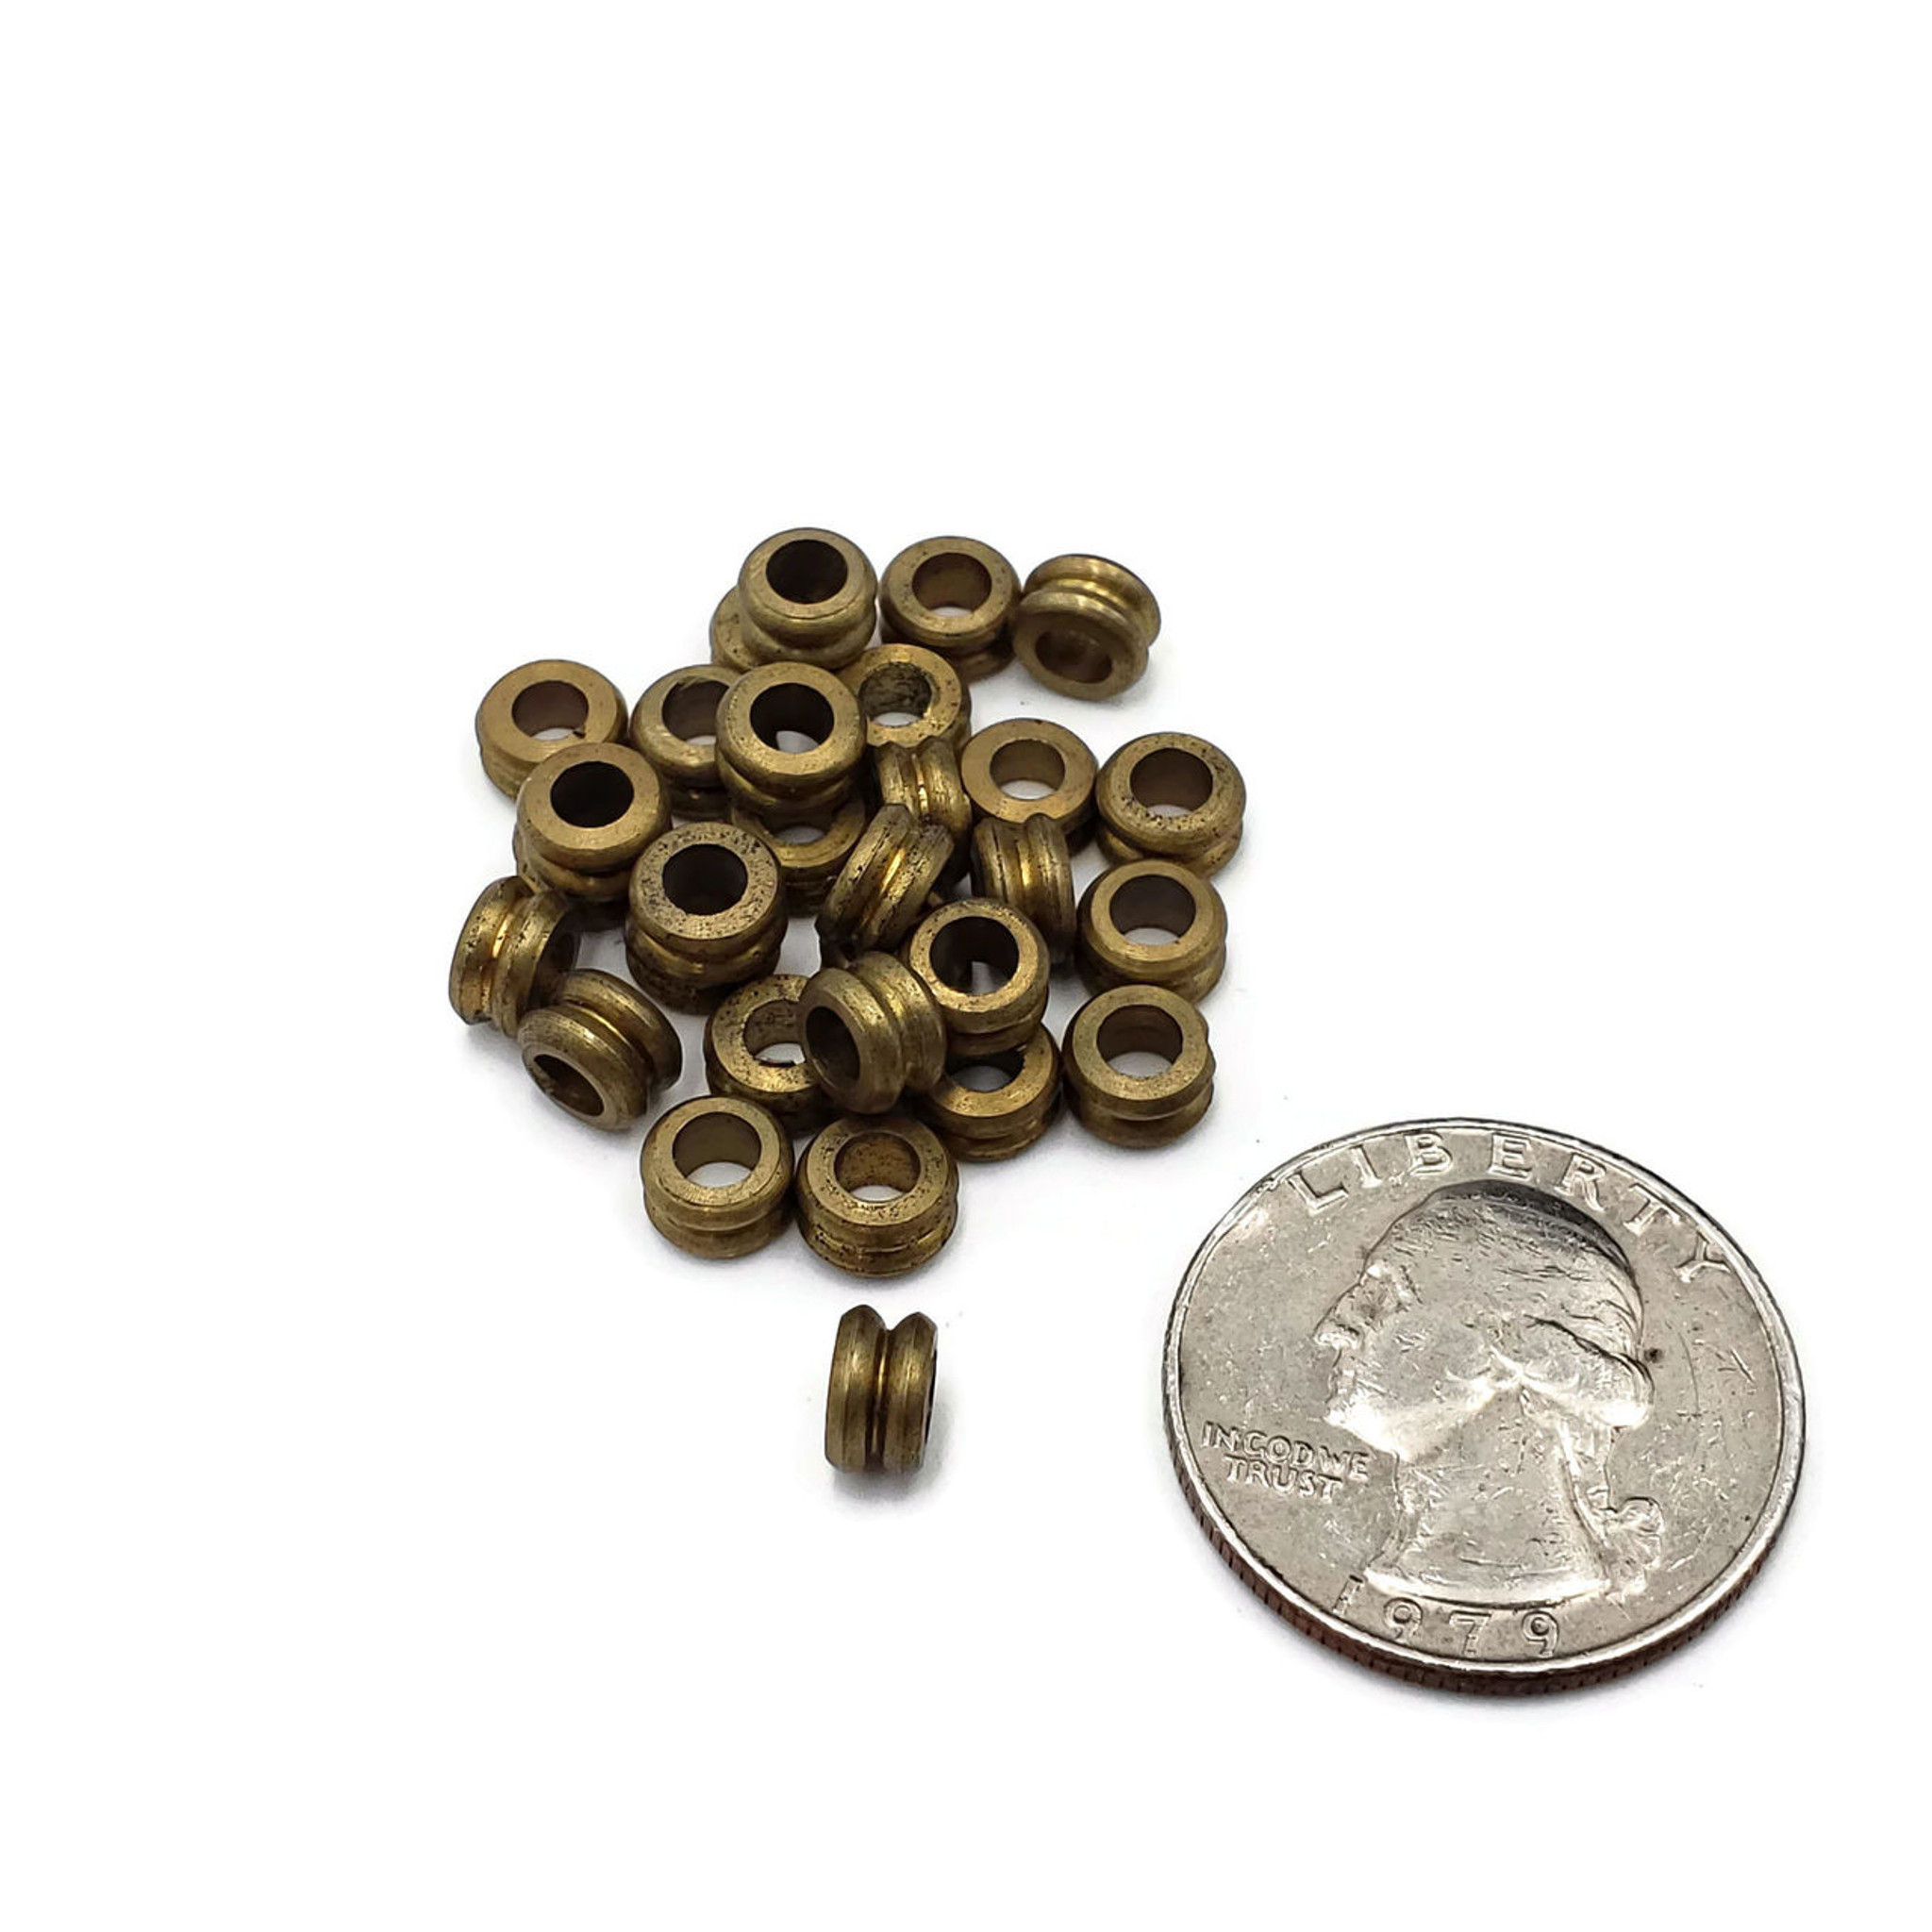 Brass Beads Spacer Jewelry Beads 3mm Cylindrical 50pcs